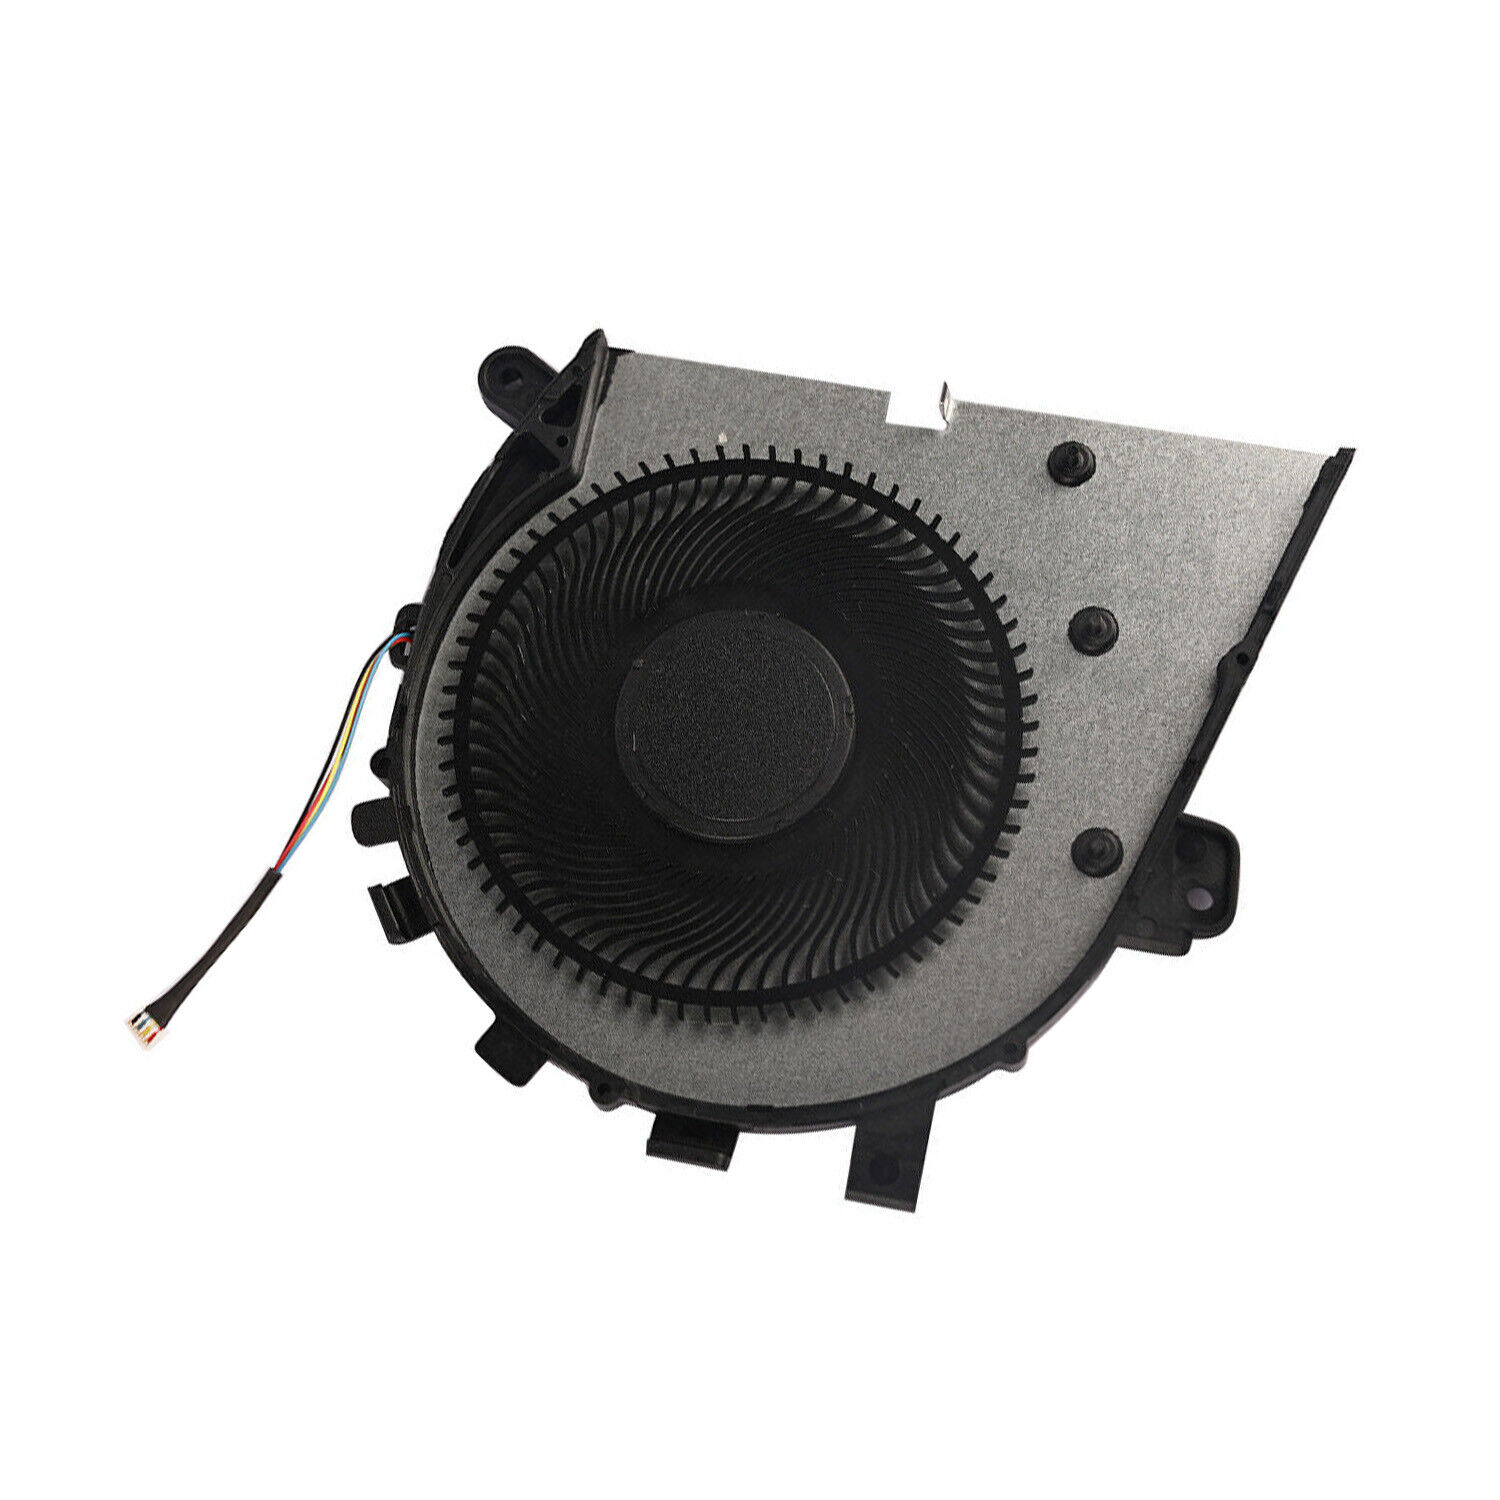 New 5V 4Pin CPU Cooling Fan For Lenovo YOGA C740-14 C740-14IML DFS2001054A0T US